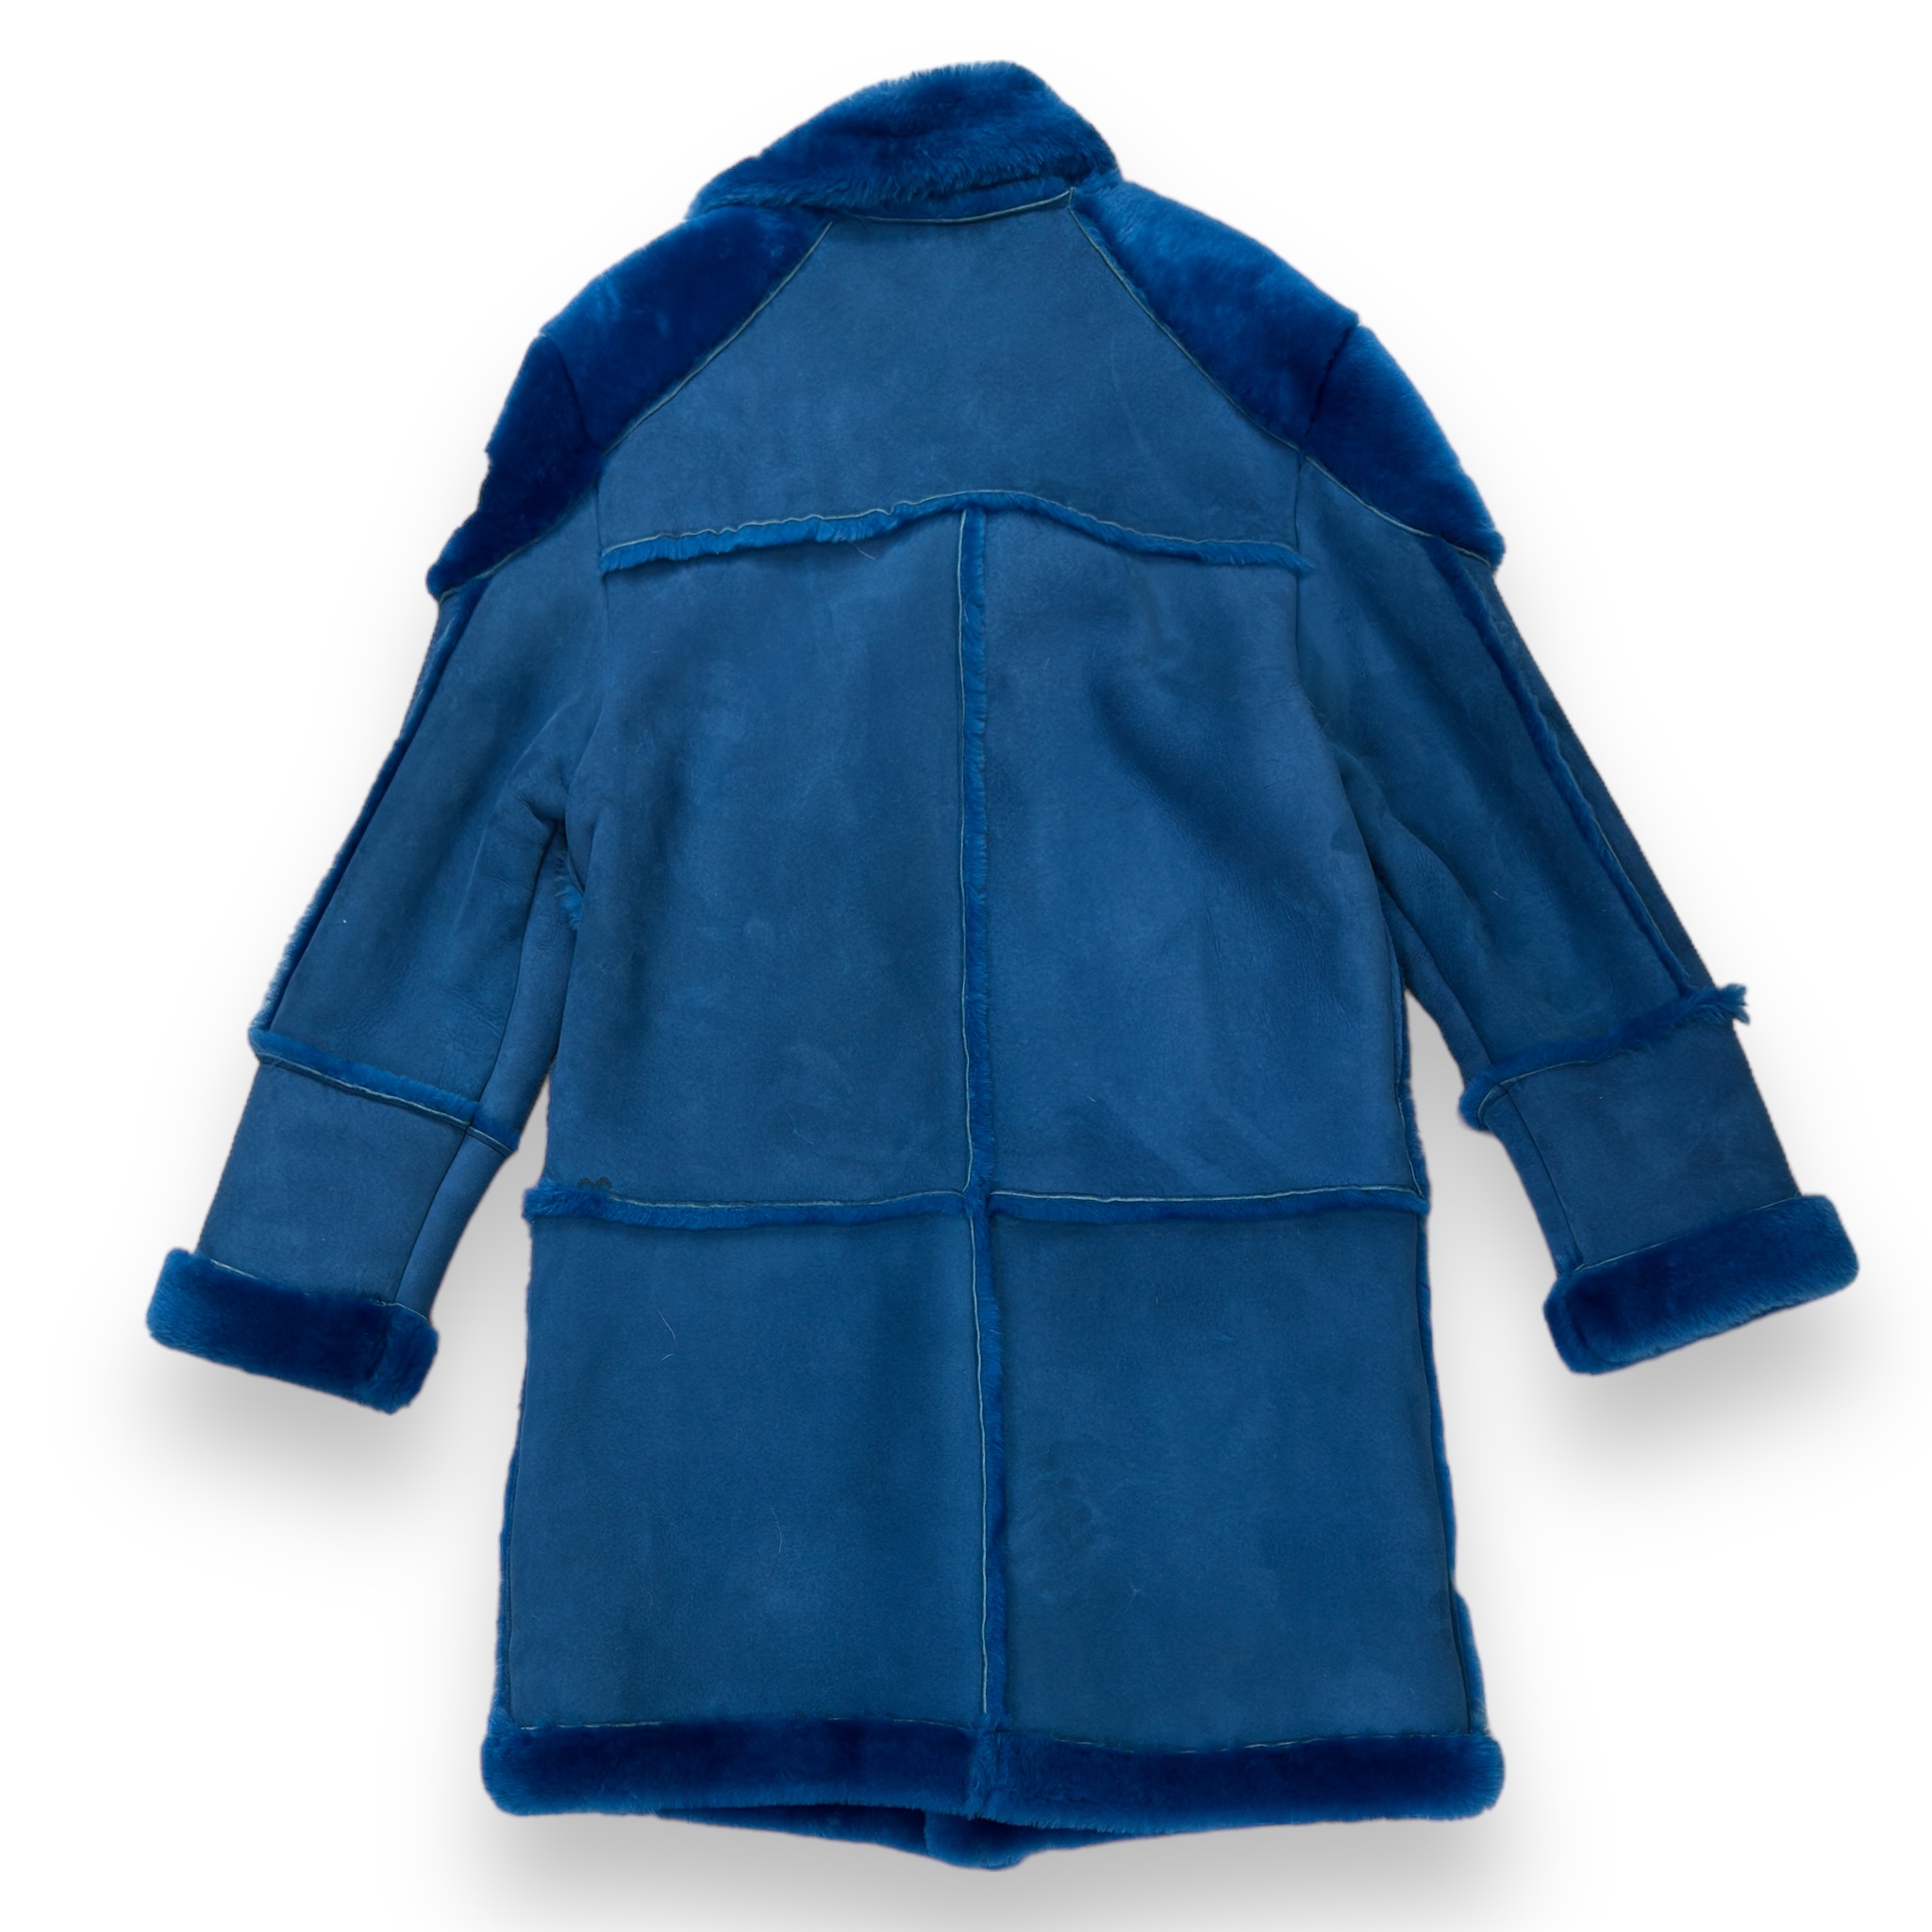 Blue Shearling Coat with Blue Collar - Daniel's Leather